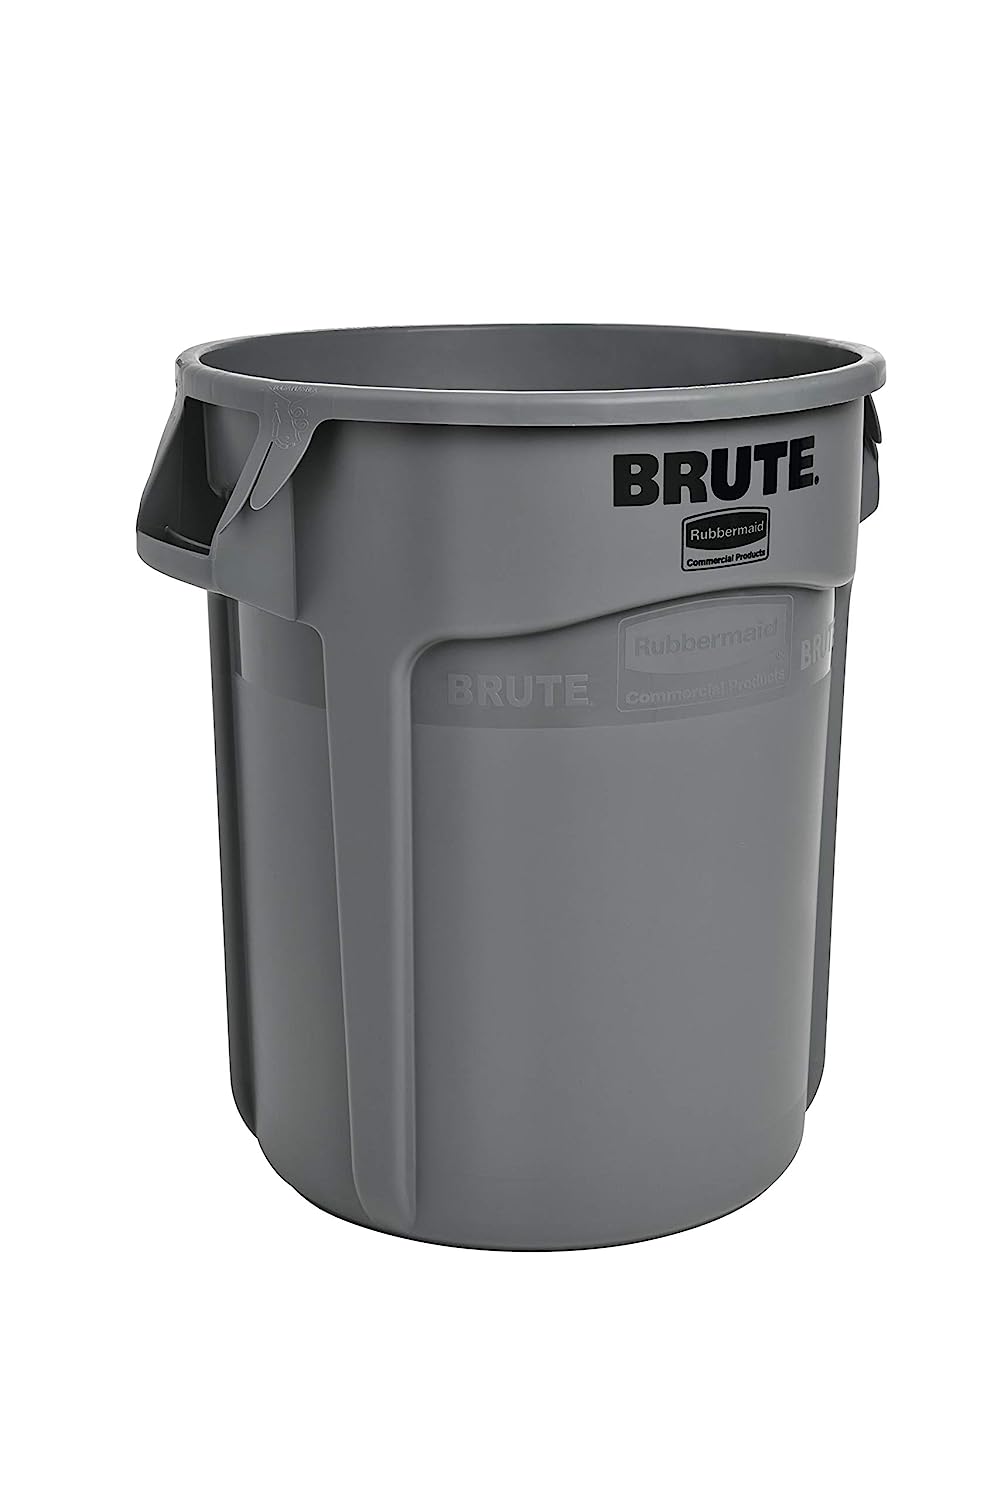 Rubbermaid Commercial Products BRUTE Heavy-Duty Round Trash/Garbage Can, 10-Gallon, Gray, Outdoor Waste Container for Home/Garage/Bathroom/Outdoor/Driveway